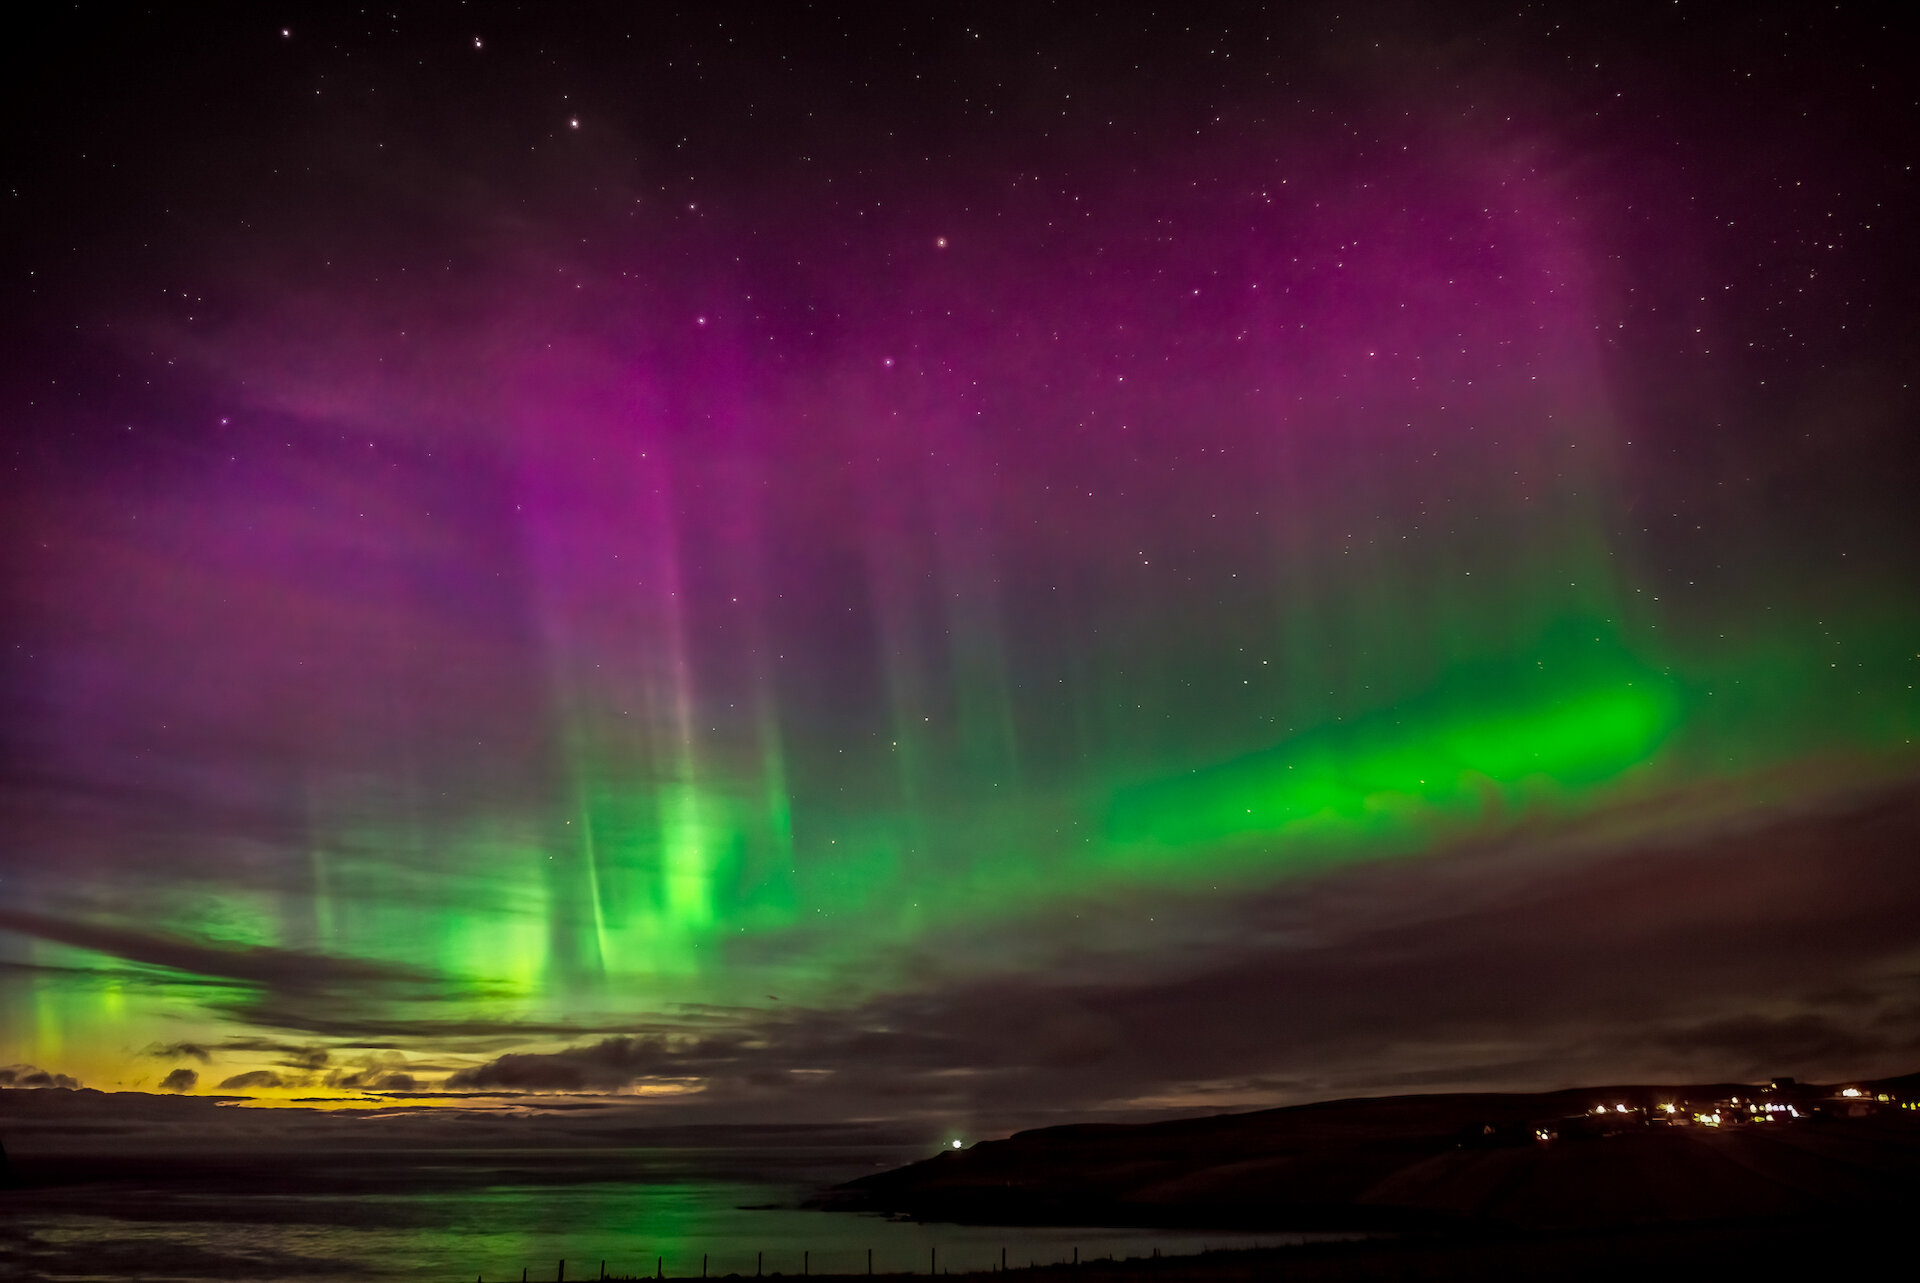 A strong and colourful aurora display over Bigton.